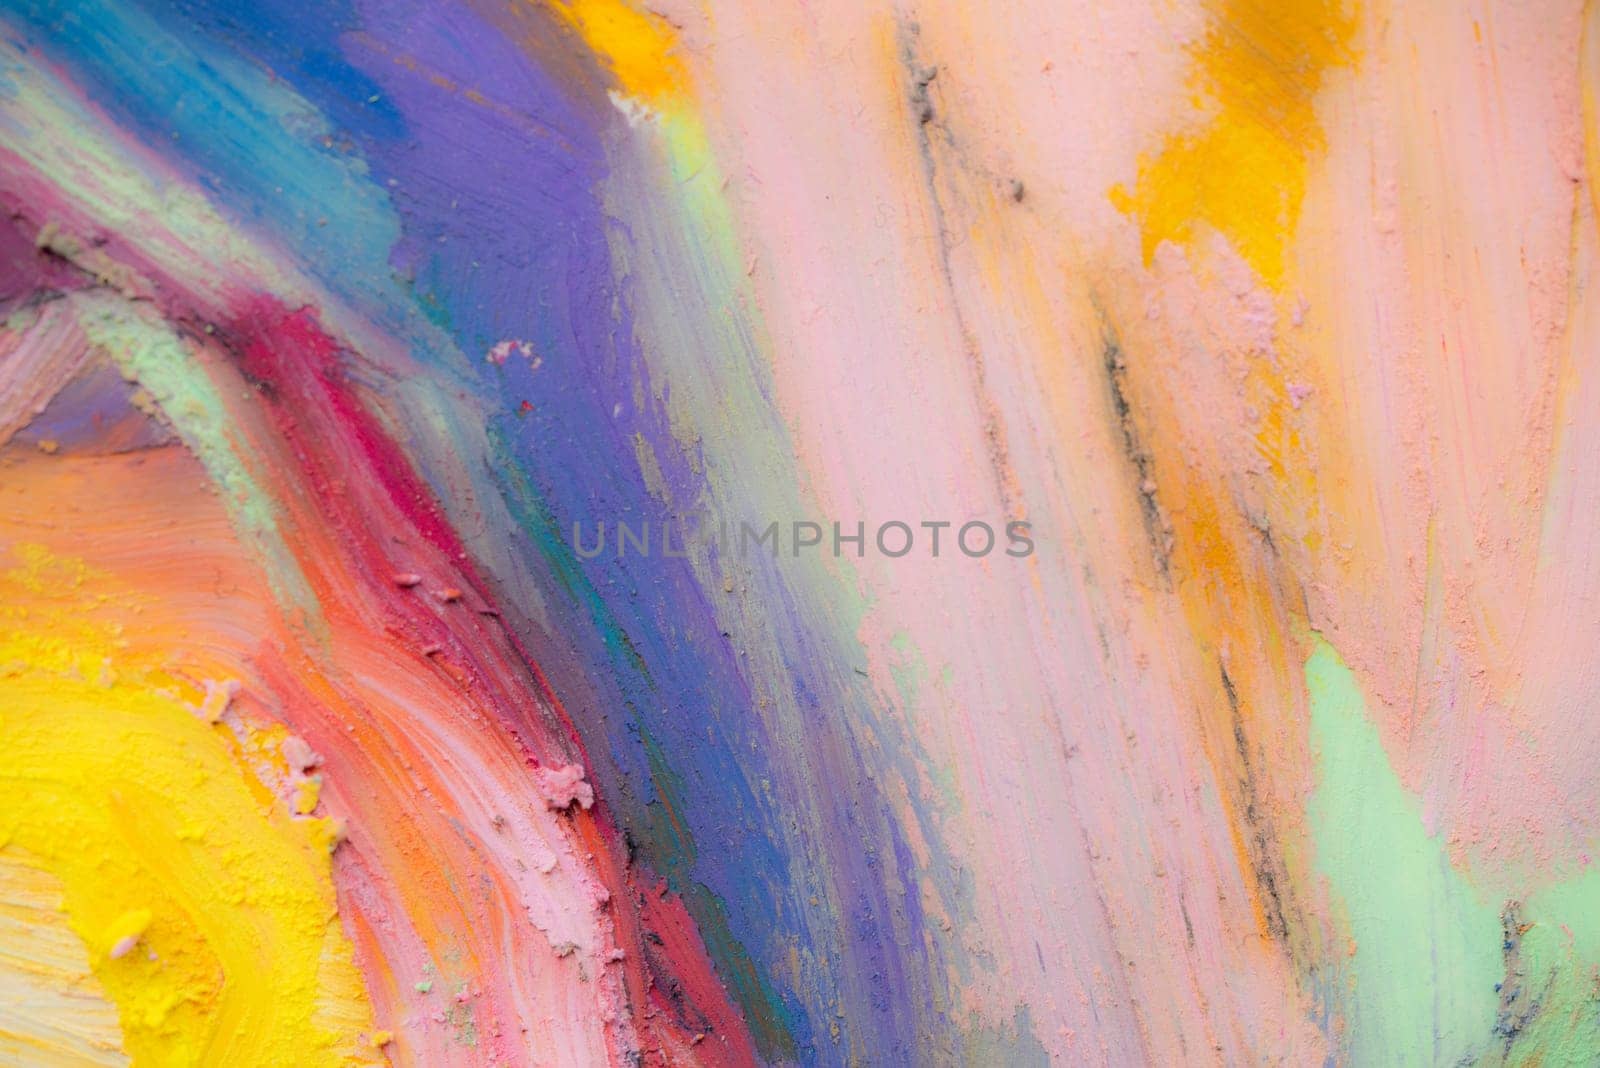 Picture drawning with oil pastels. Conceptual abstract picture. Fragment of multicolored texture painting. Abstract art background. Rough brushstrokes of paint. Highly-textured, high quality details.